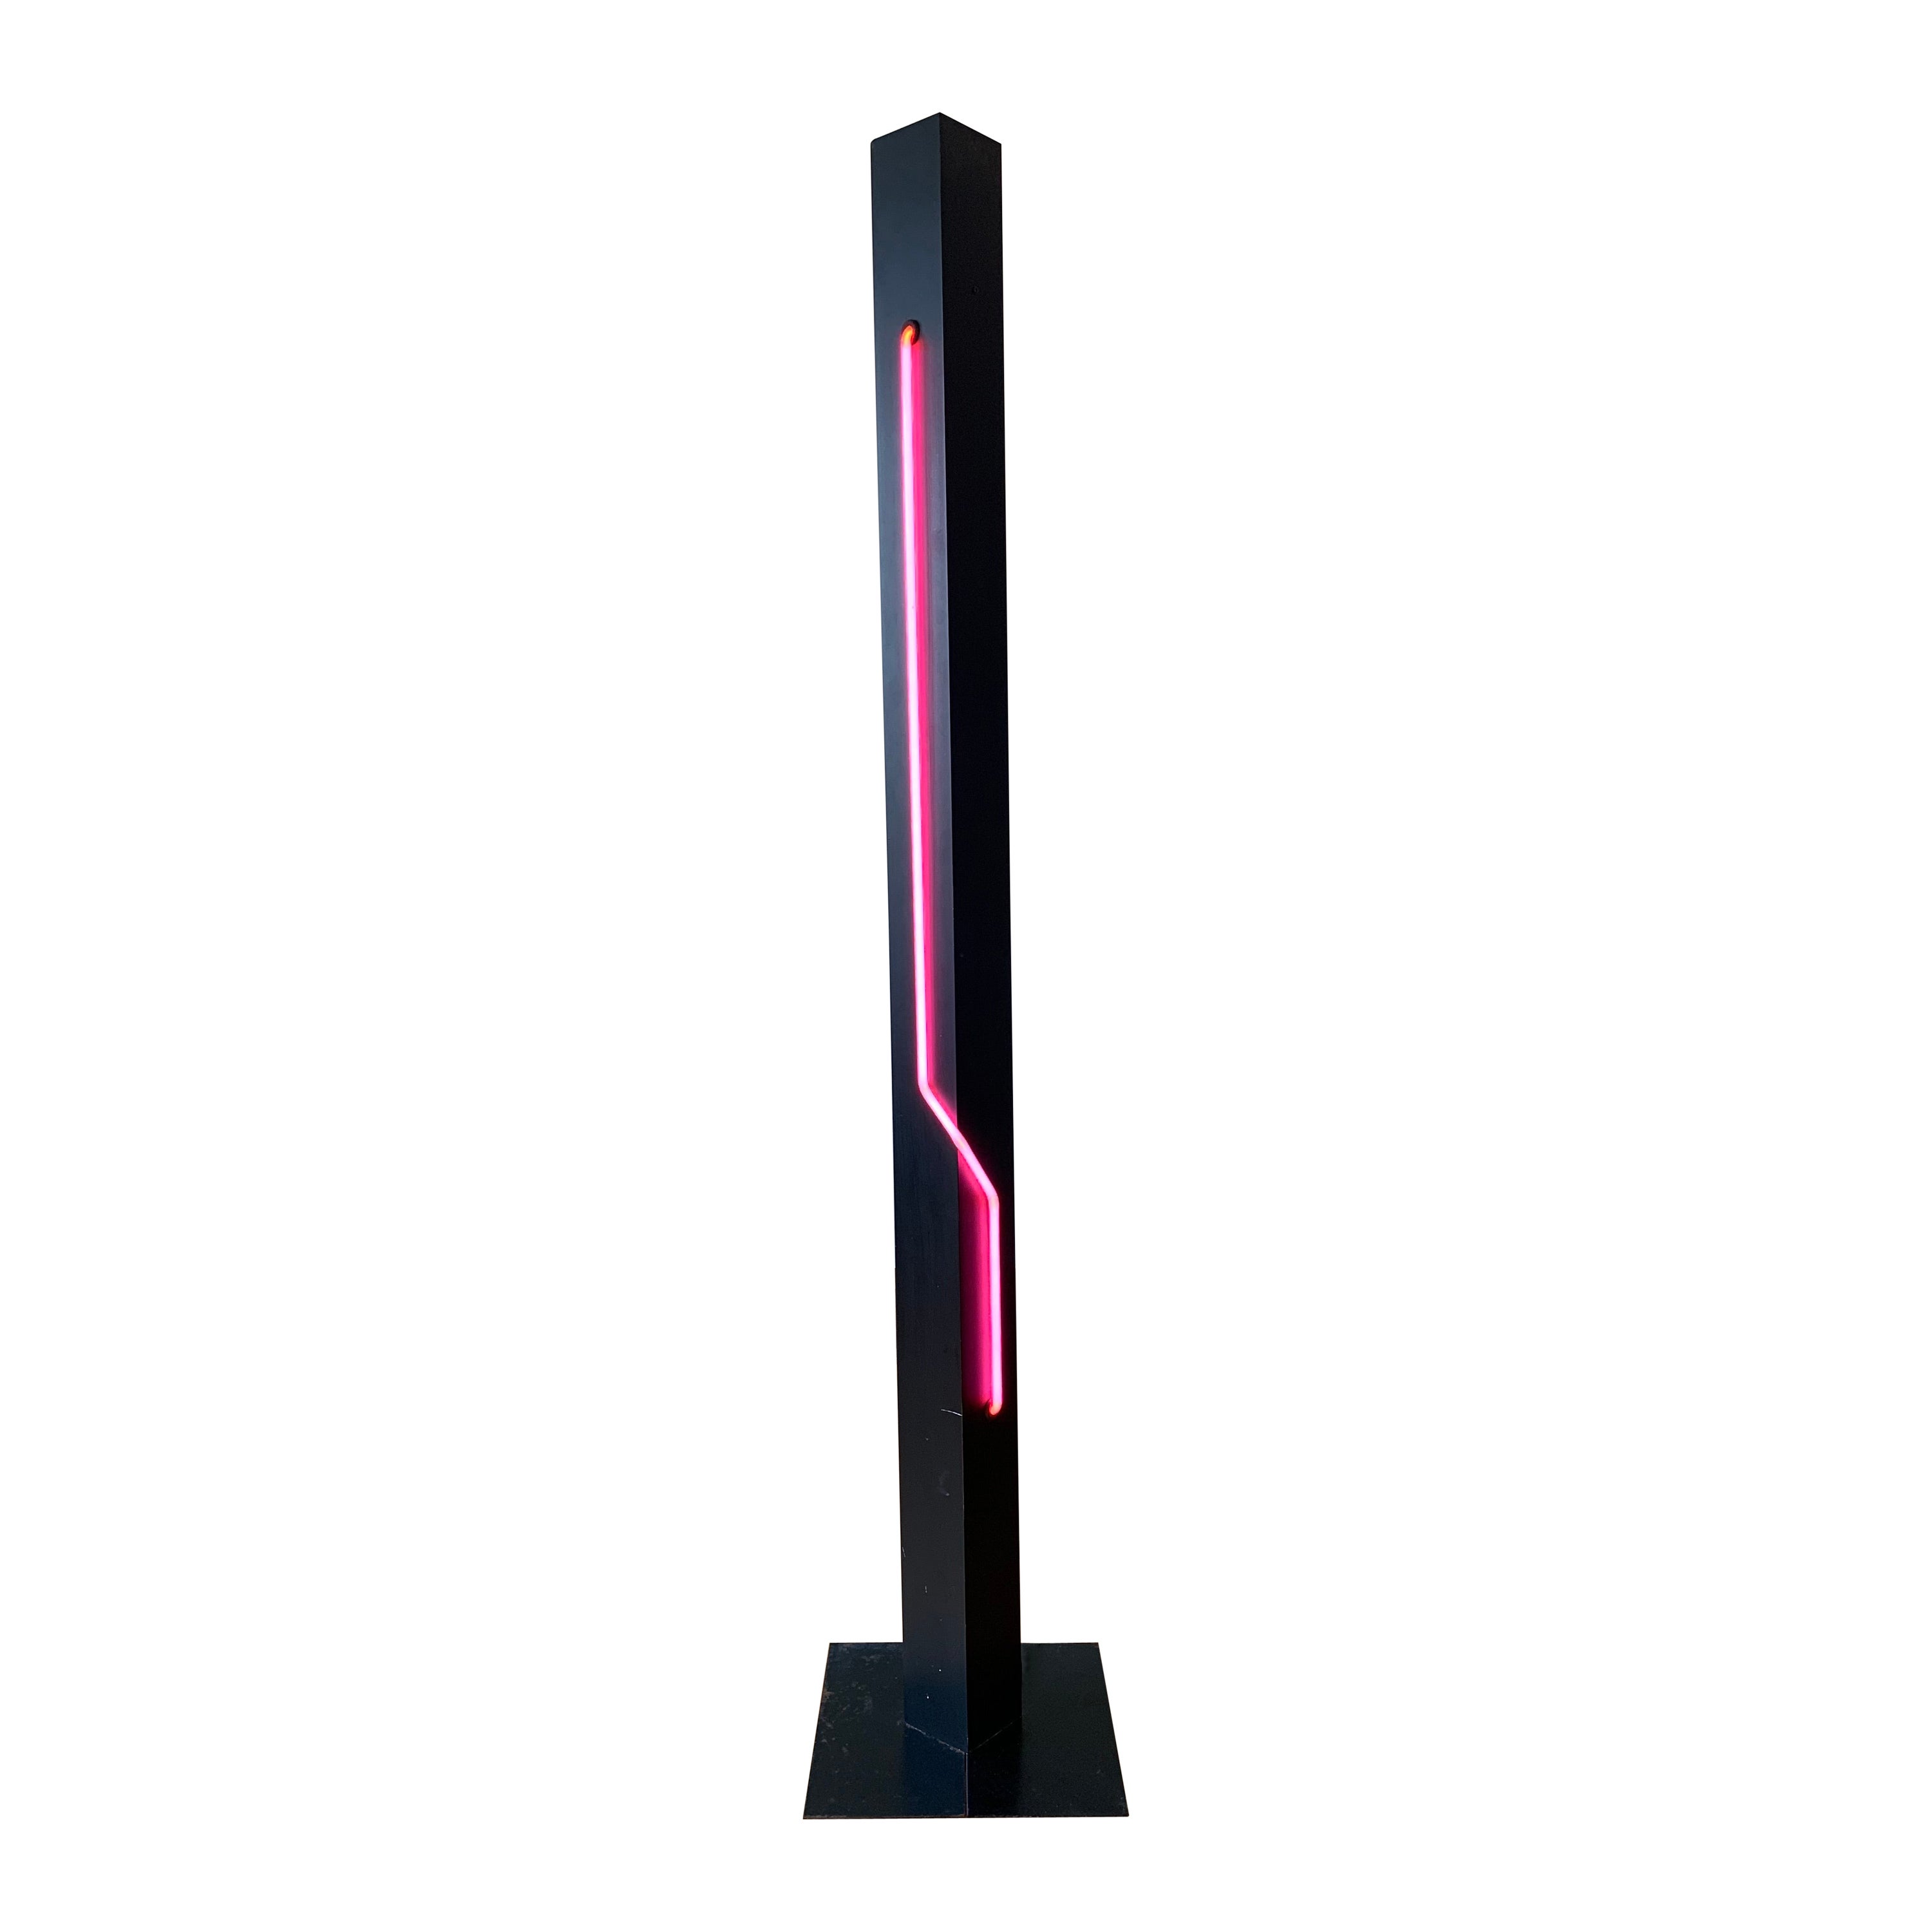 Sculptural Neon Torchiere Floor Lamp by Let There Be Neon for George Kovacs For Sale